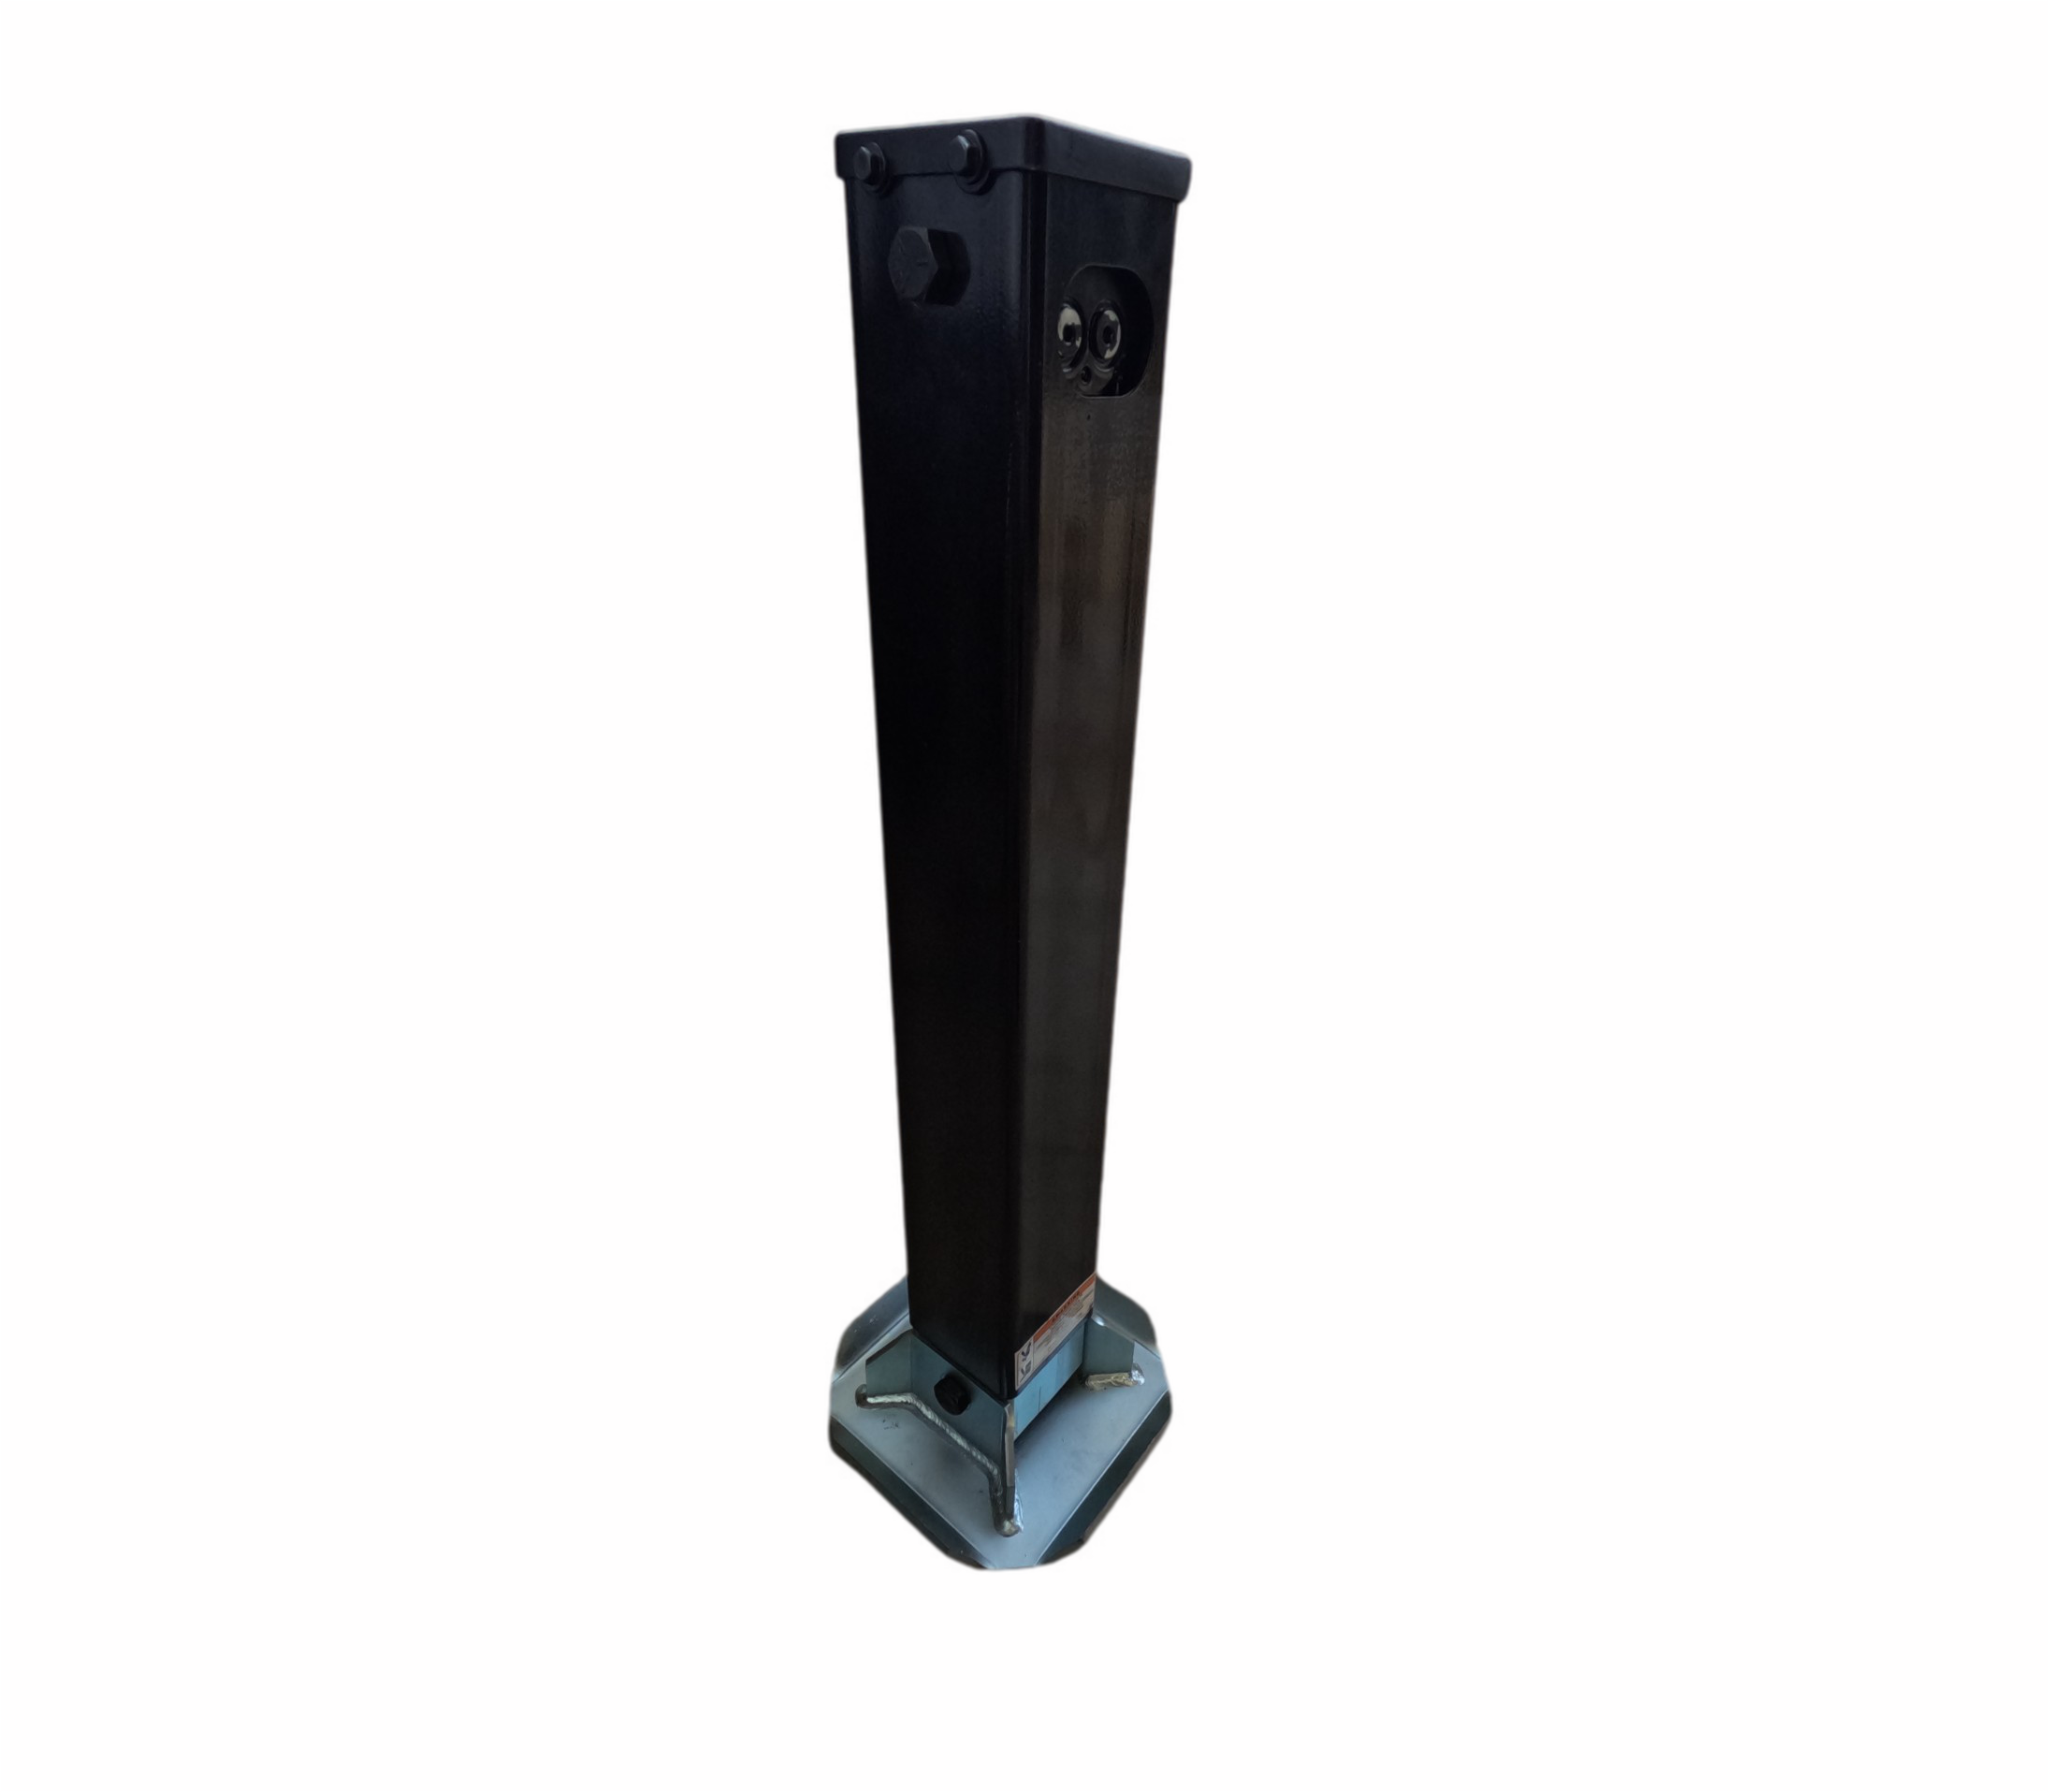 Primary Mover Hydraulic Trailer Jack: 12k Single Hydraulic Leg Kit for Weld On or Bolt On. Robust black square design with zinc-plated components, dual holding valve, and 12,000-pound lifting capacity.